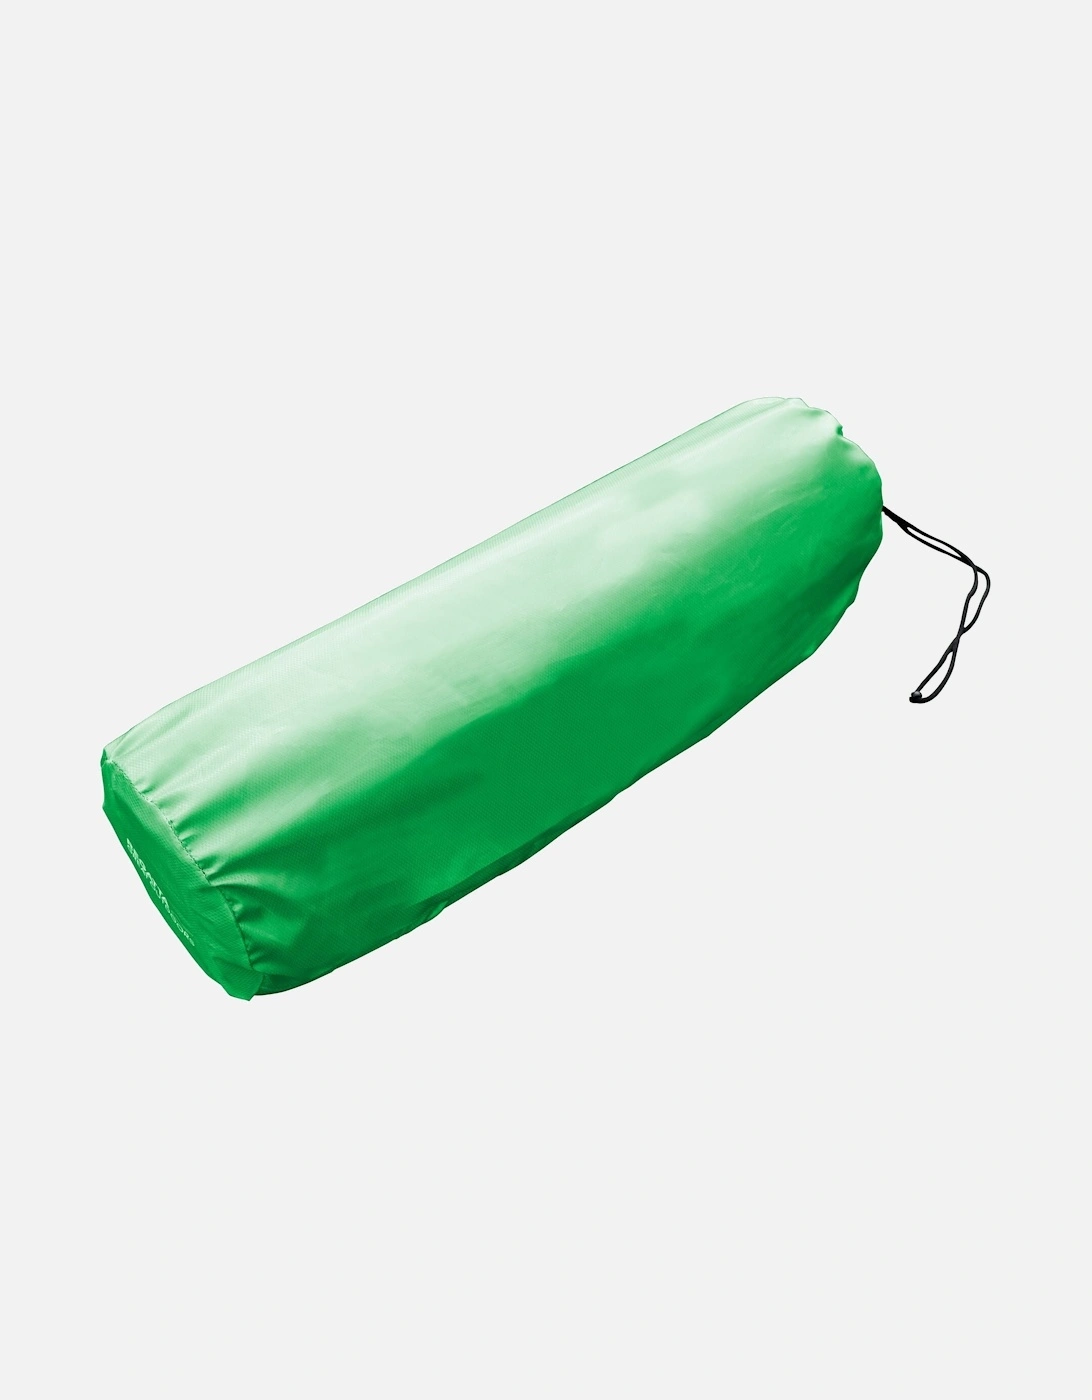 Napa 5 Lightweight Self Inflating Foam Camping Mat - Extrme Green - One Size